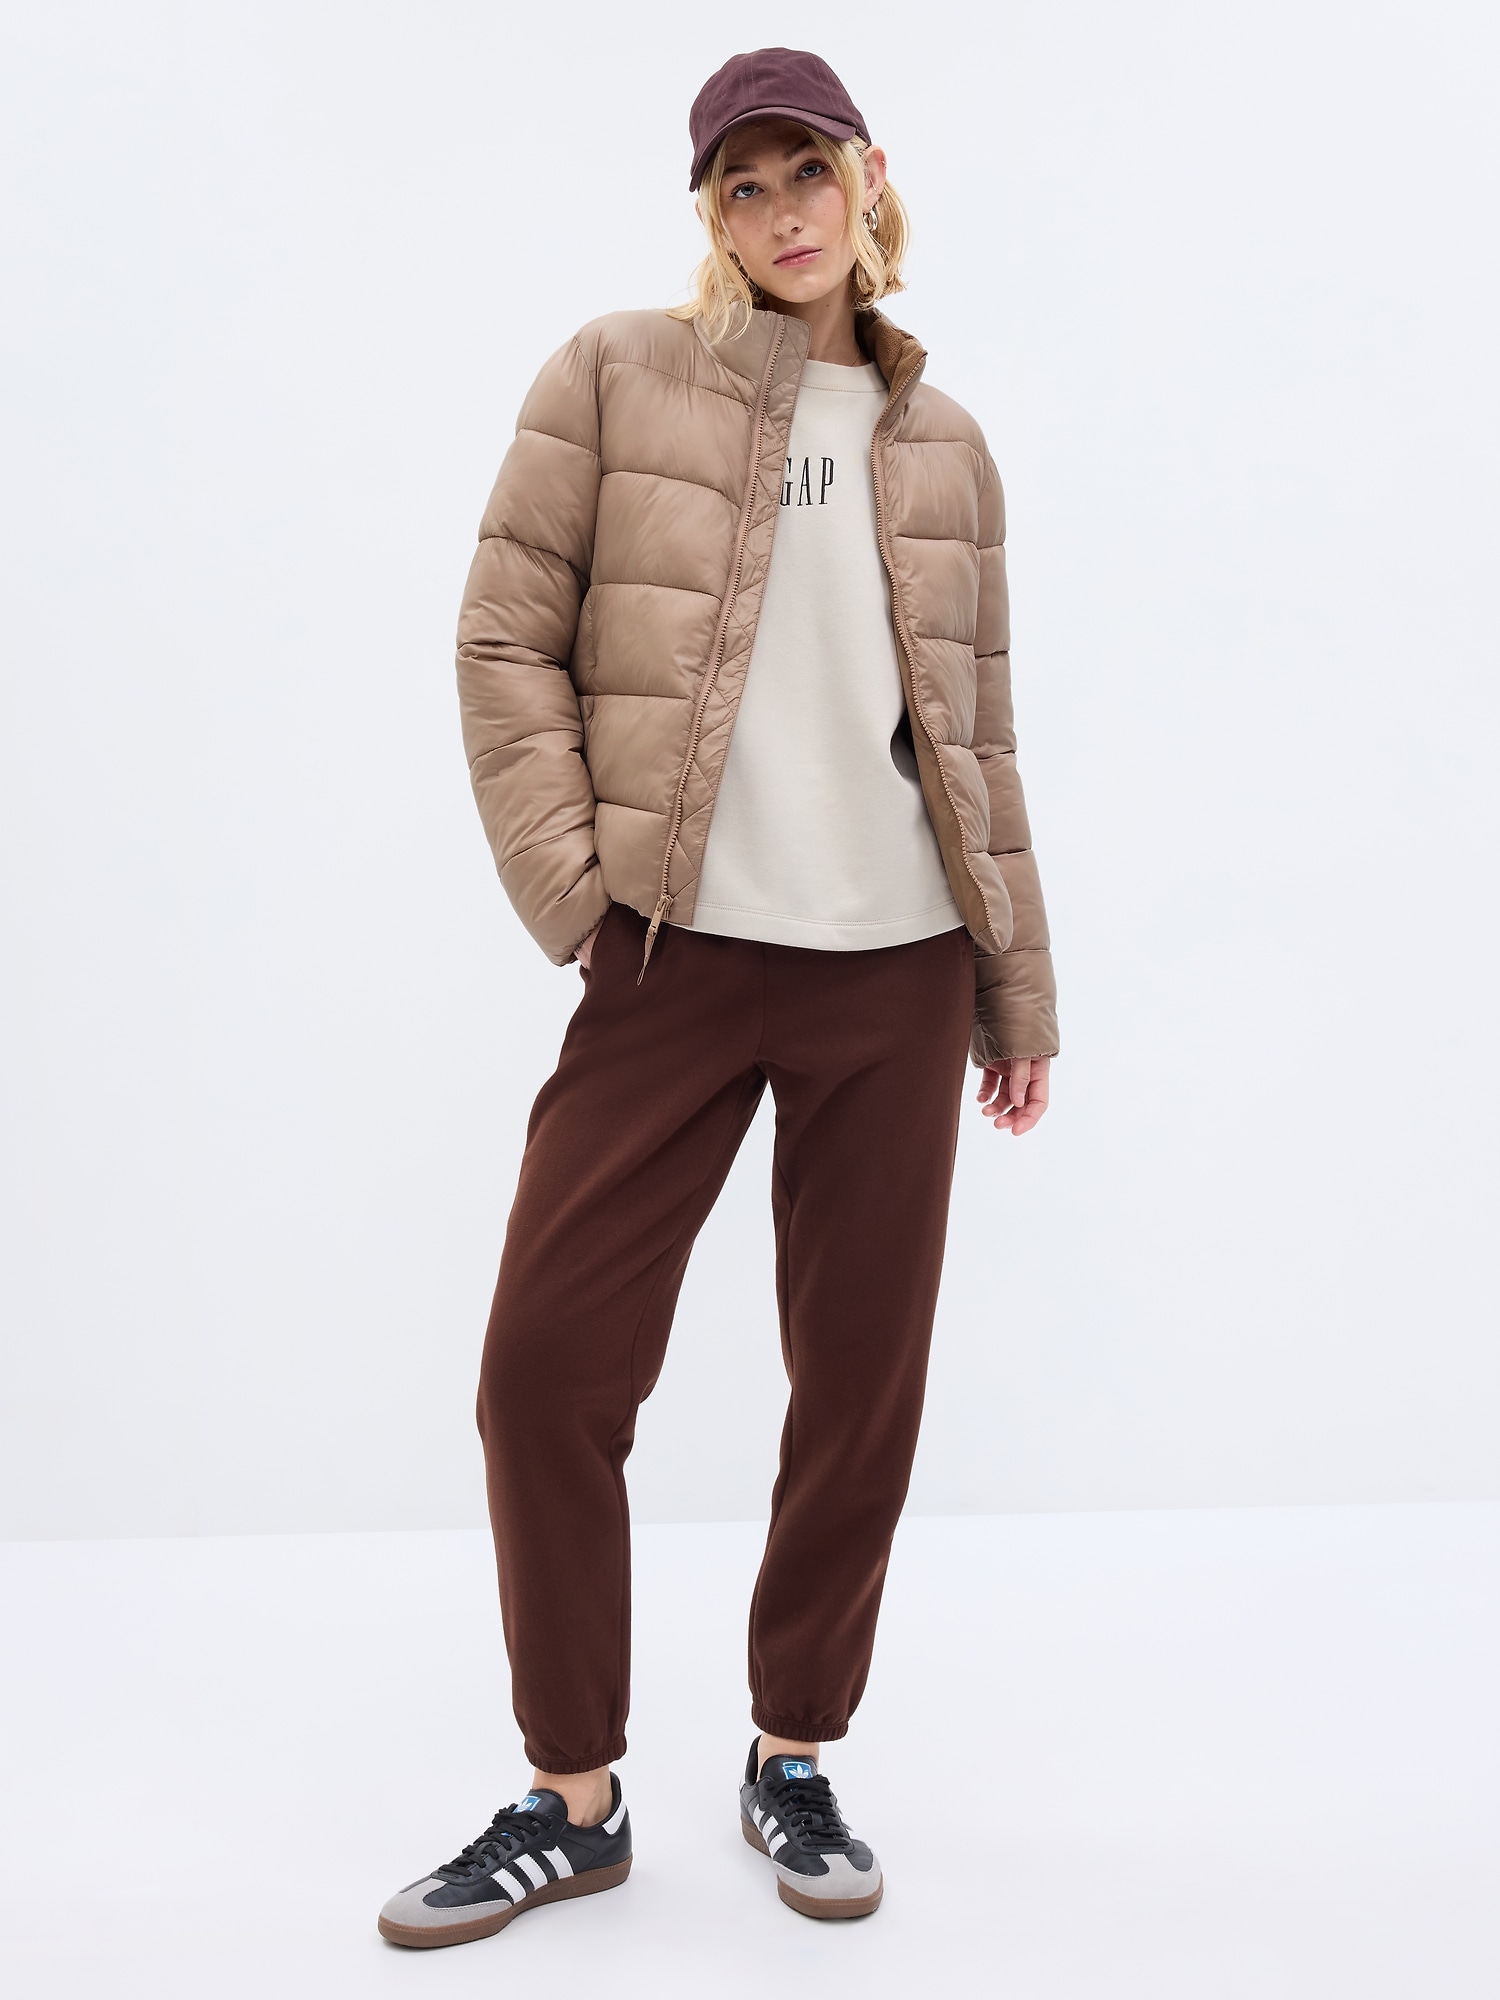 GAP Quilted Jacket - Women